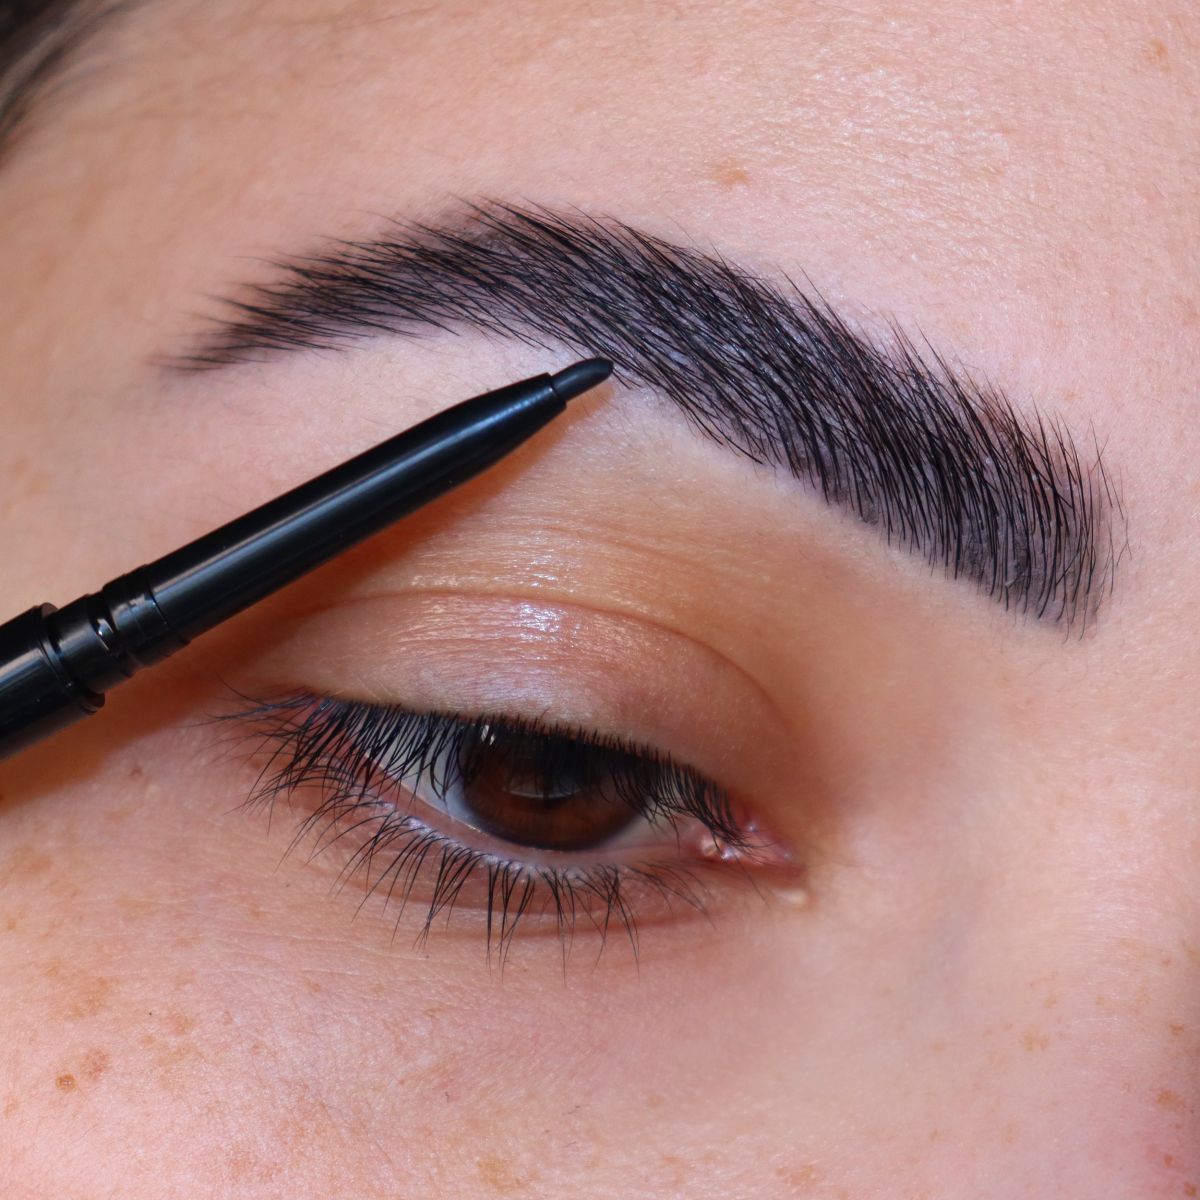 CREATE HAIR STROKES TO FILL IN YOUR BROWS